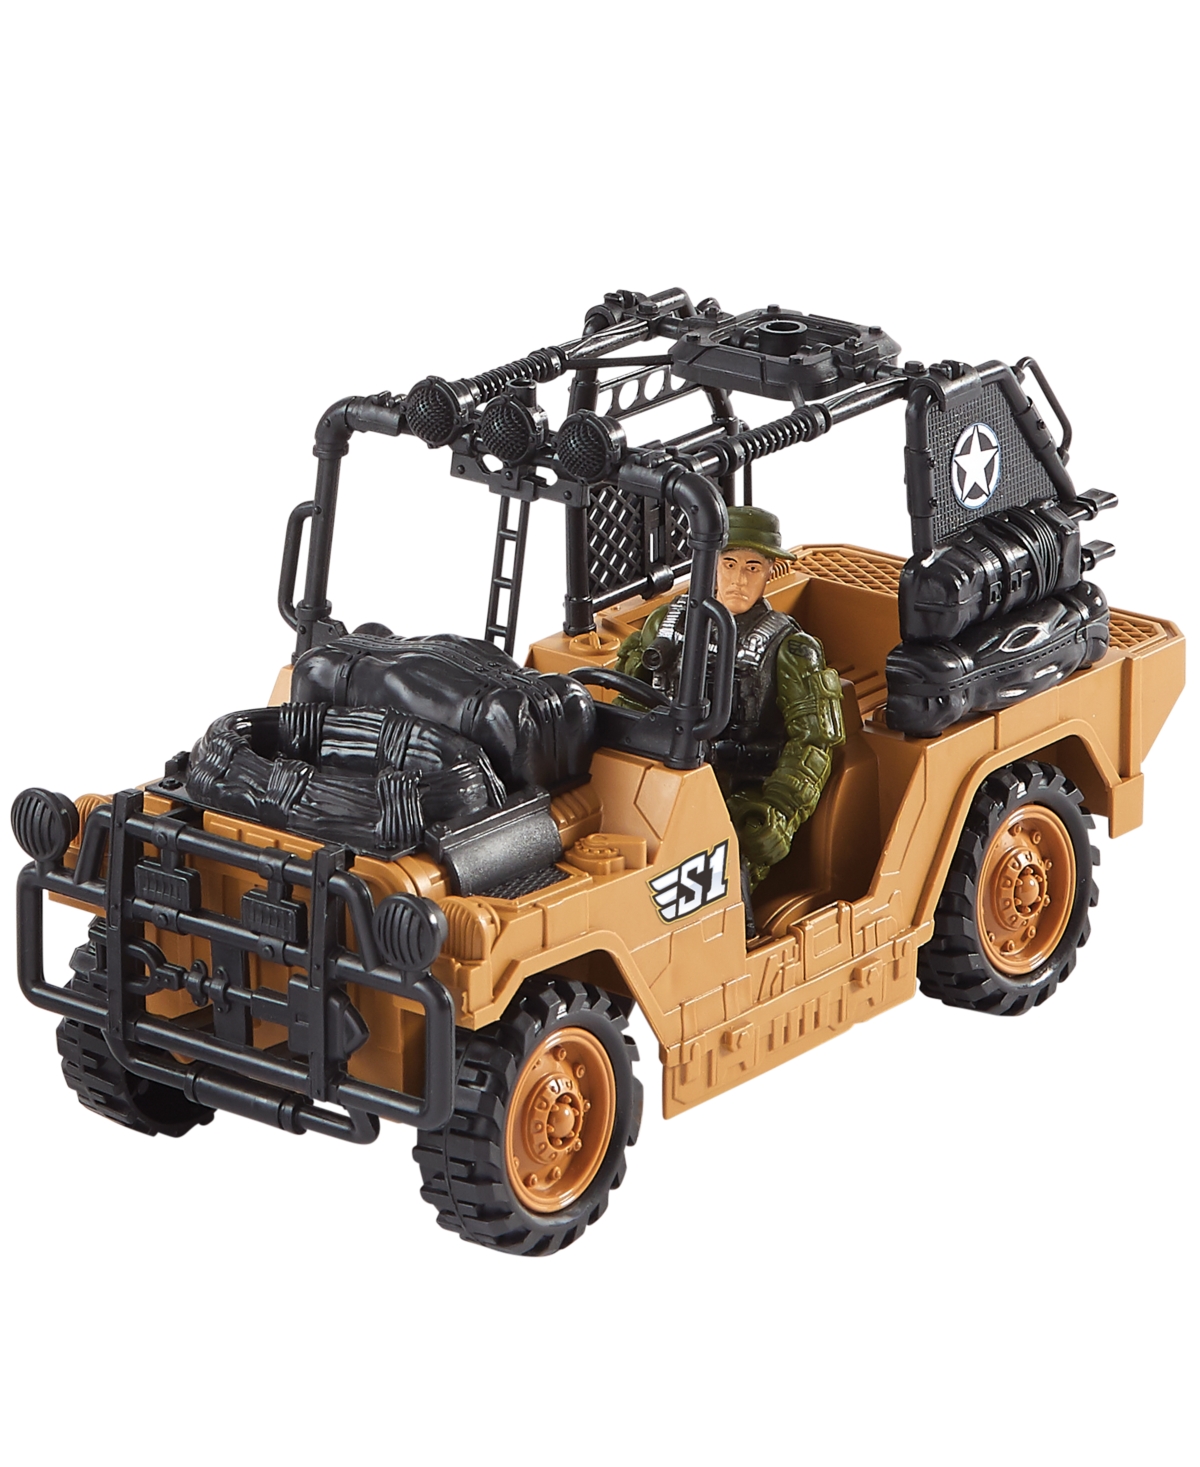 True Heroes Military-Inspired Playset With Tower, Created for You by Toys R Us